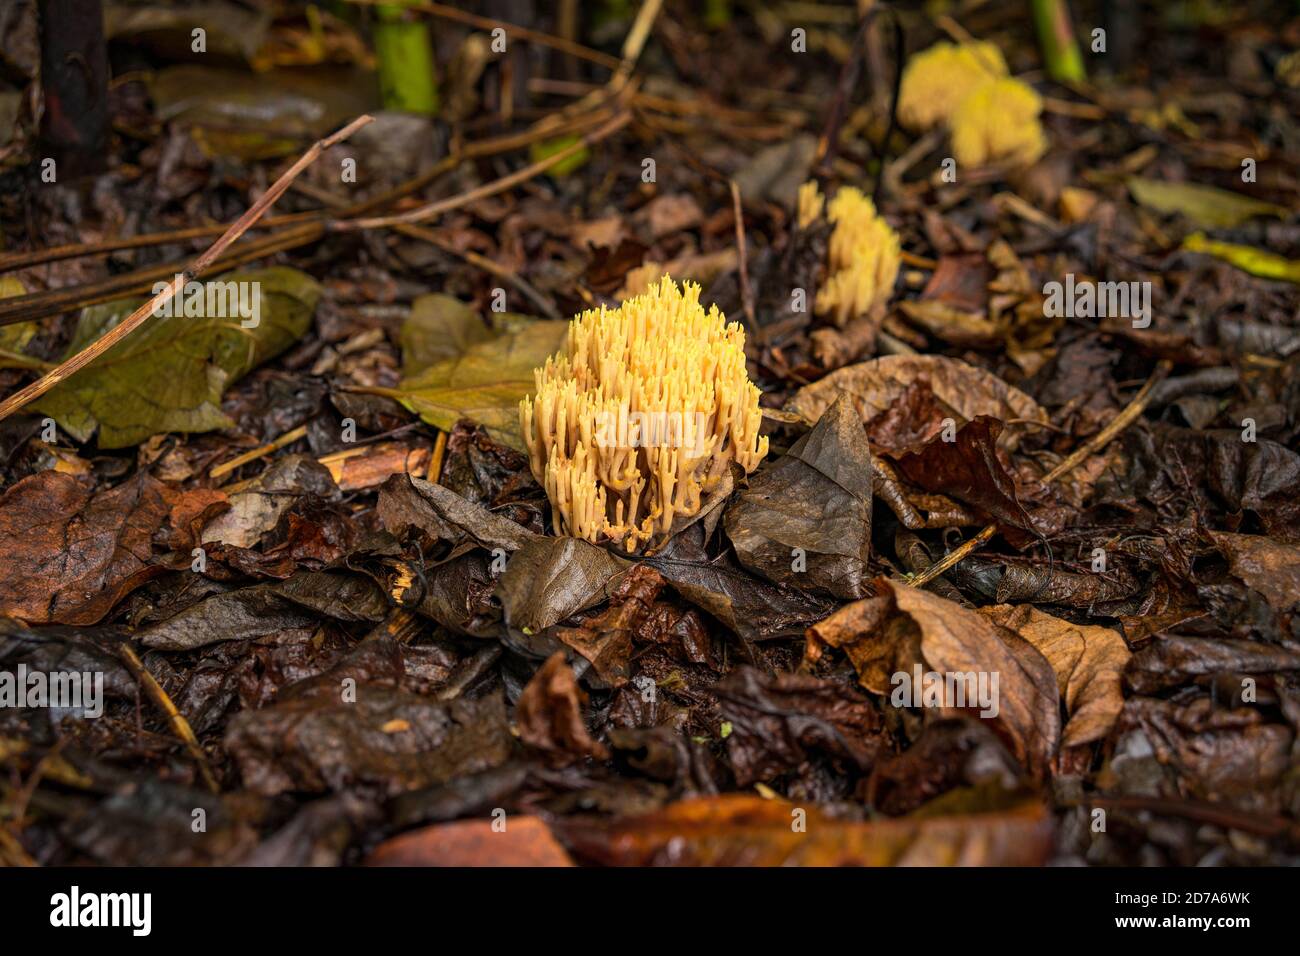 Closeup of strict-branch coral fungus and autumn dirty leaves on the ground Stock Photo